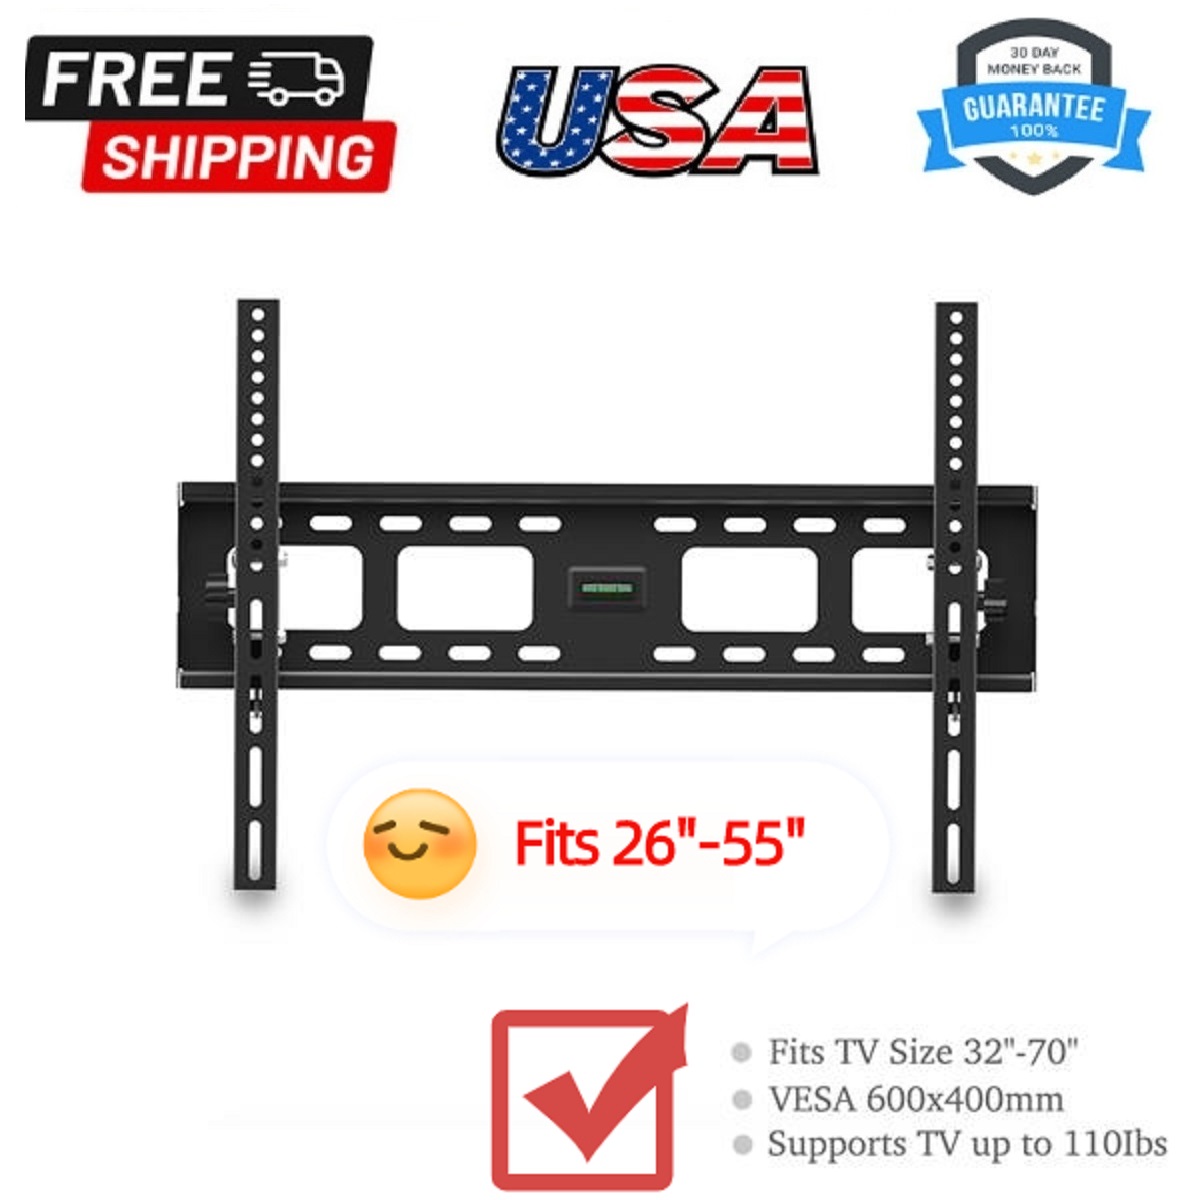 Adjustable TV Wall Mount - Tilting TV Mounting Brackets Fit 32, 40, 42, 46, 50, 55, 65,70 Inch Plasma Flat Screen TV with Spirit Level Load Capacity 50kg TMW600 - image 1 of 16